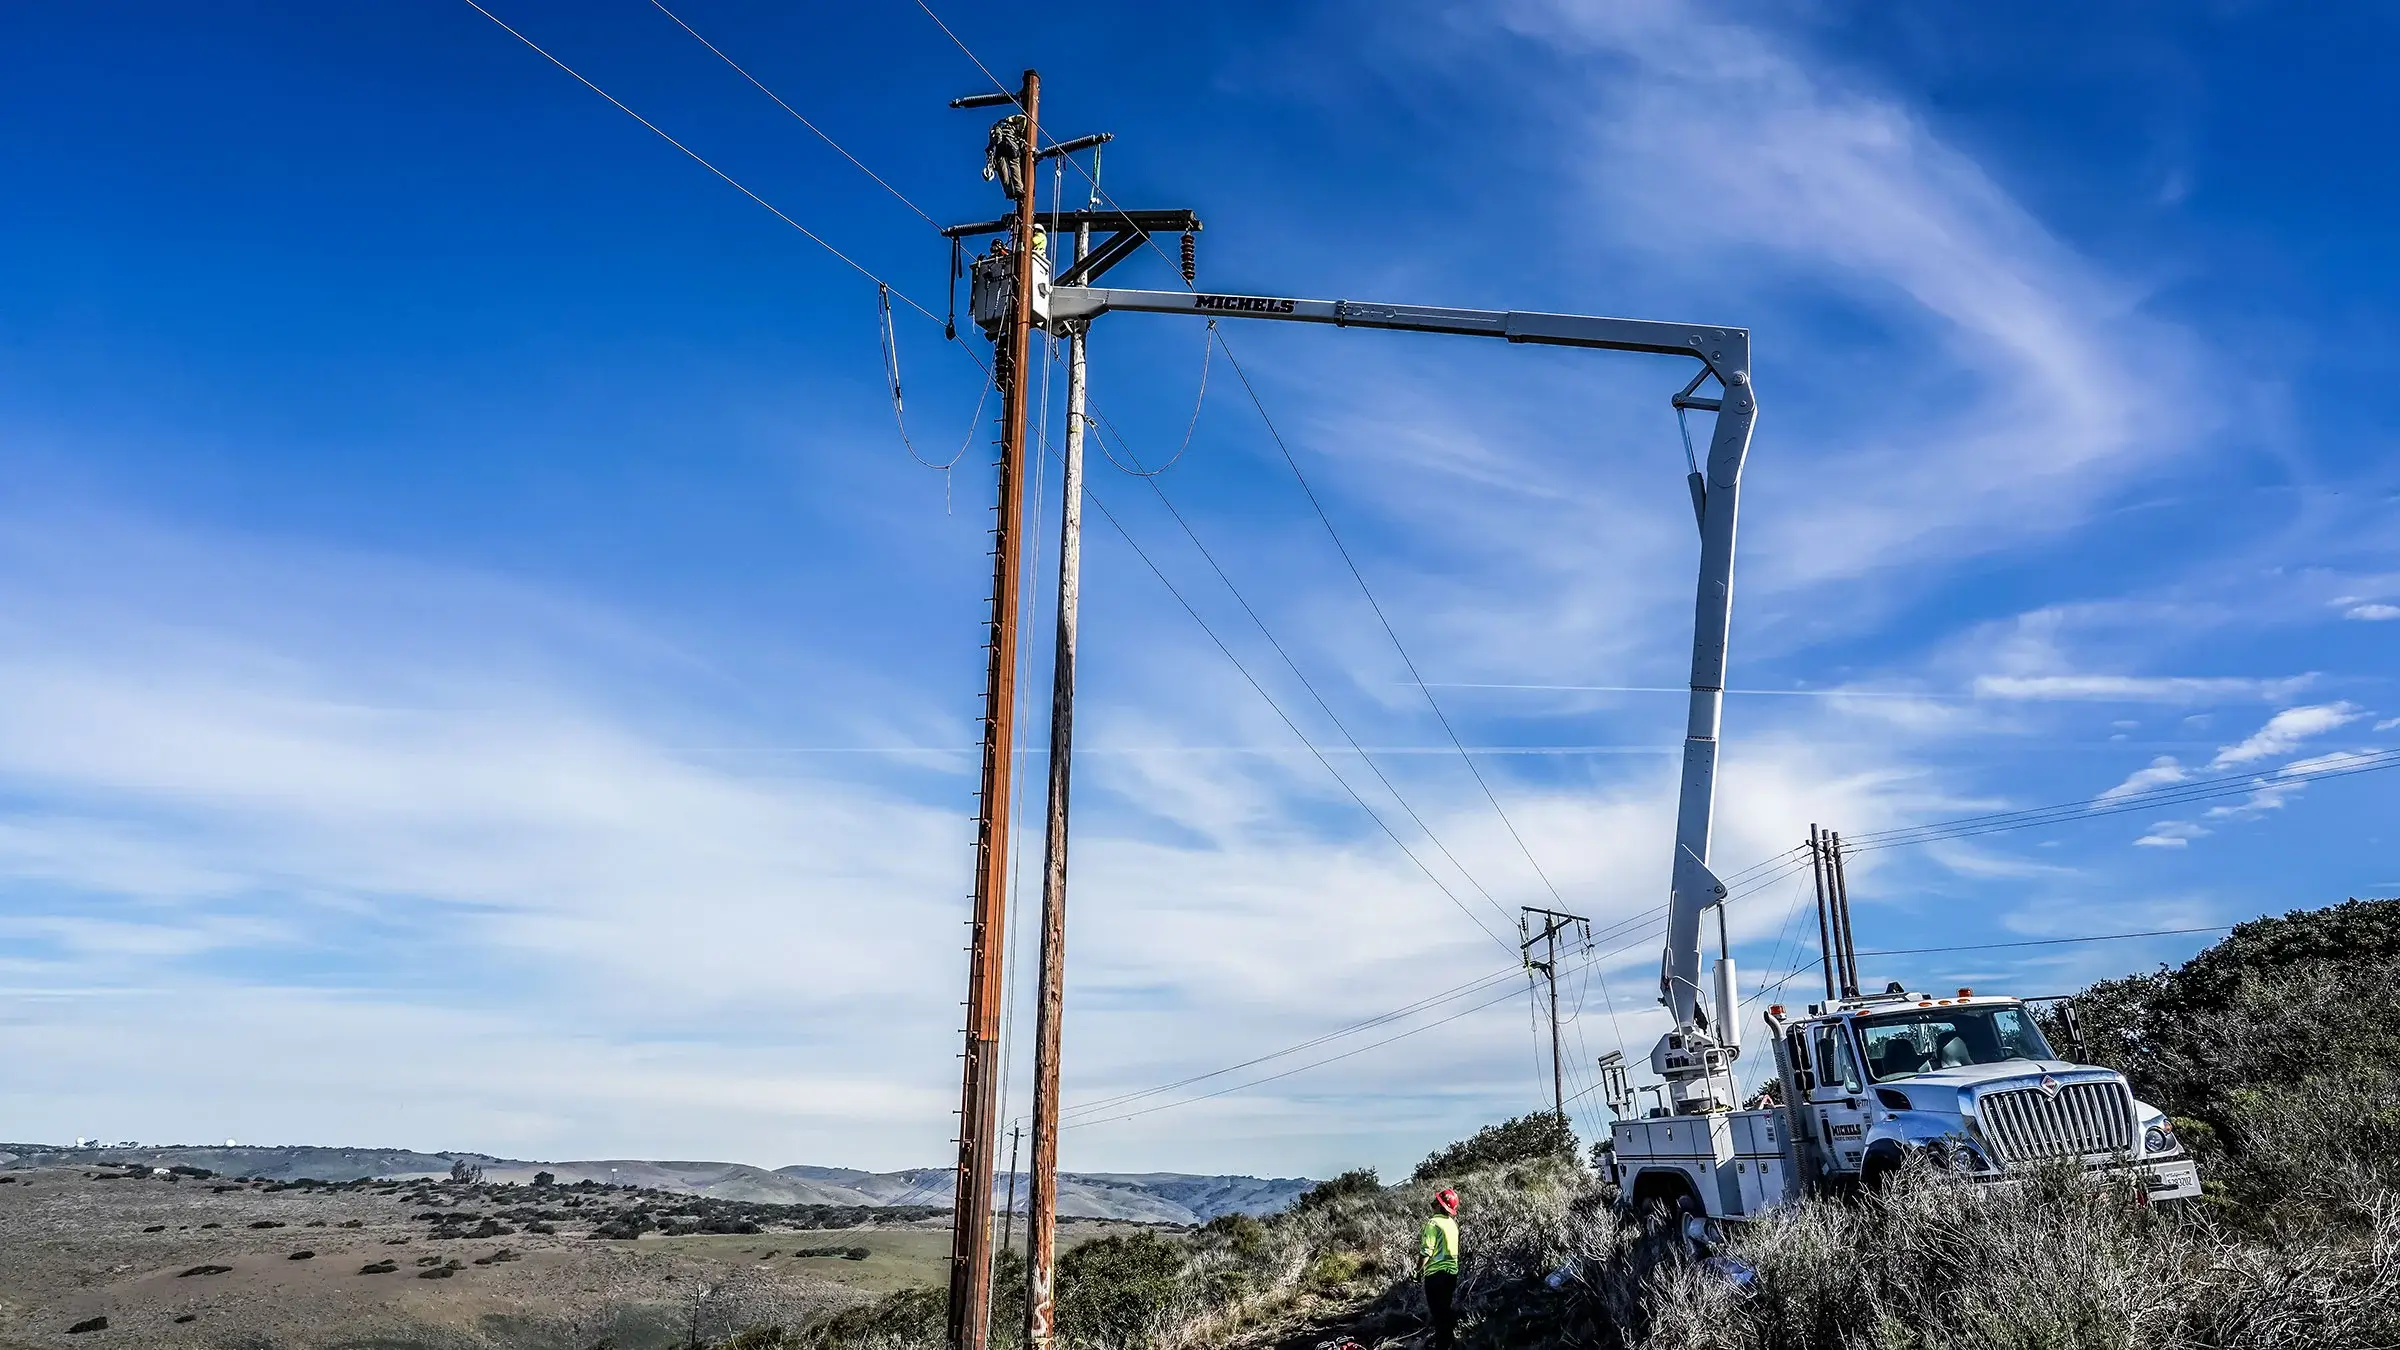 A bucket truck operates on a rural hillside transmission line.